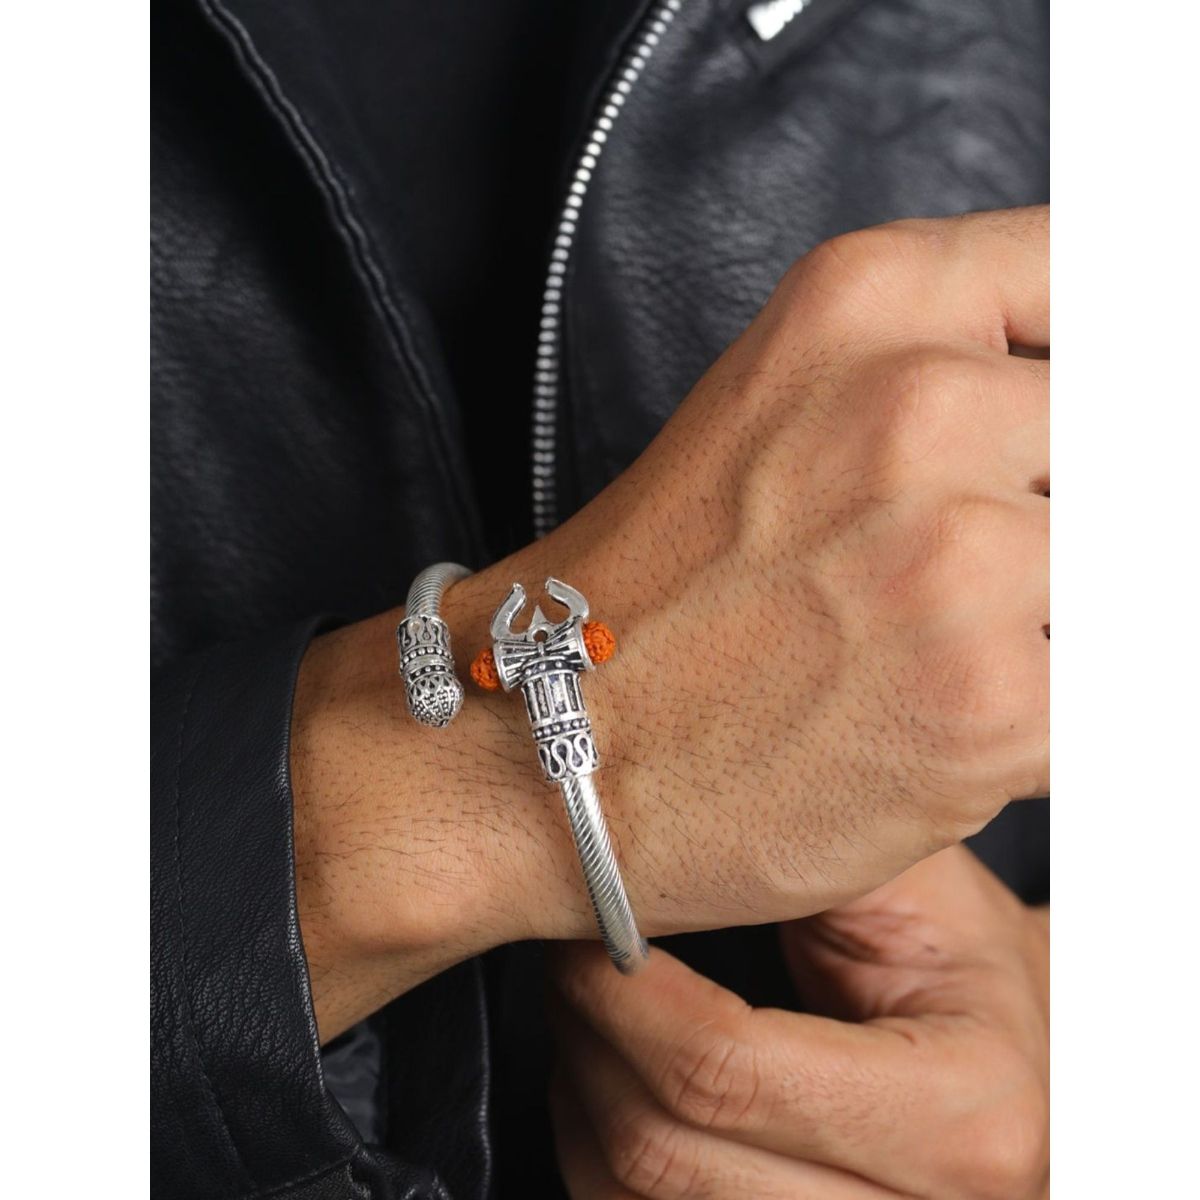 Obmyec Pearl Finger Ring Hand Chain Silver Boho India  Ubuy